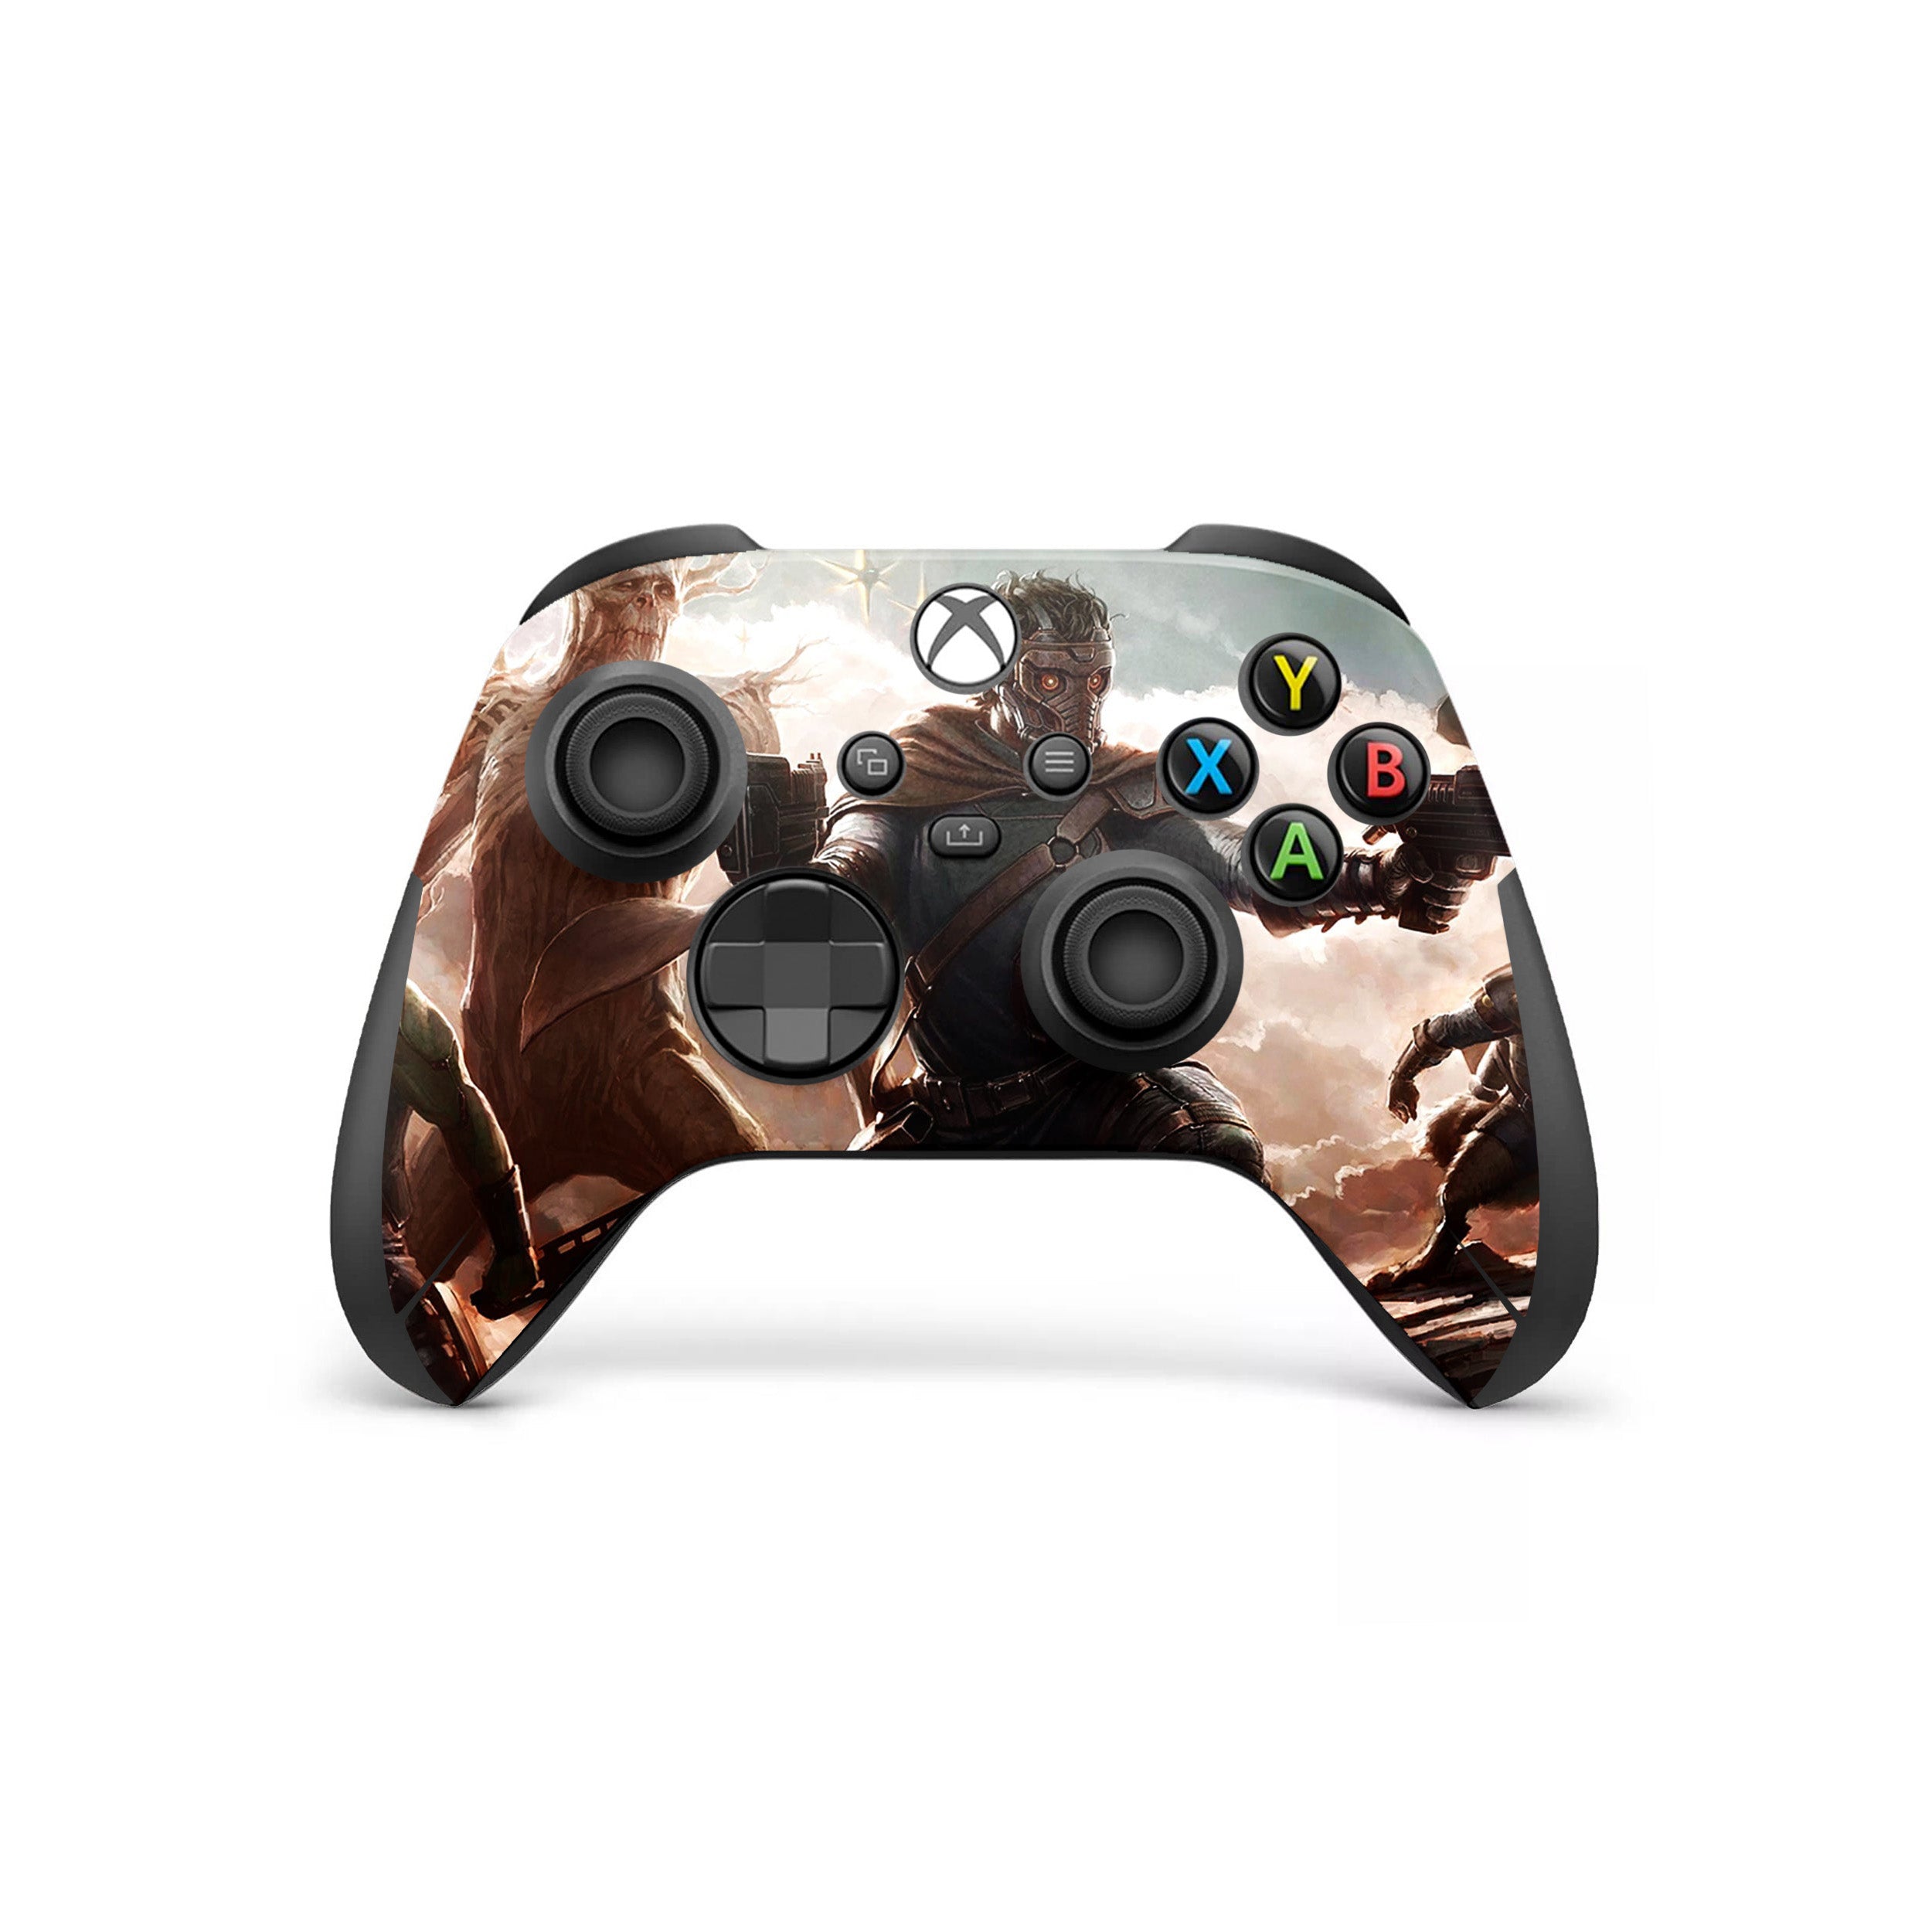 A video game skin featuring a Marvel Guardians of the Galaxy design for the Xbox Wireless Controller.